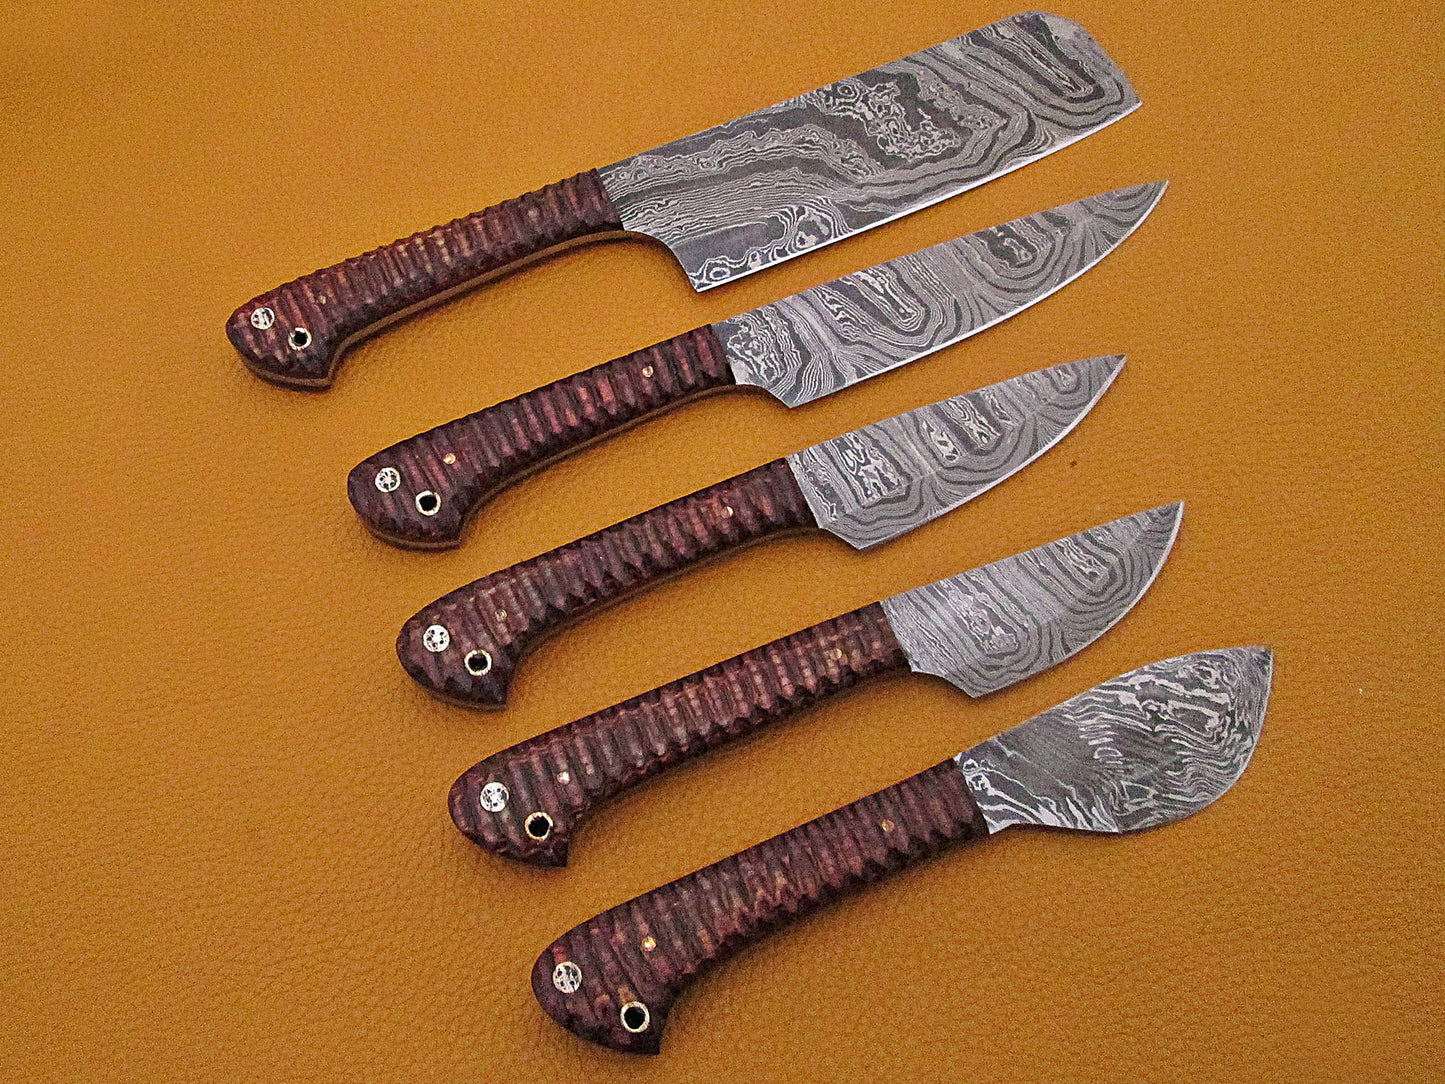 5 Pieces Damascus steel kitchen knife set includes (10.6+9.6+9.0+8.0+7.6)" knives in Brown Jigged wood scale, includes Roll able Leather suede sheath